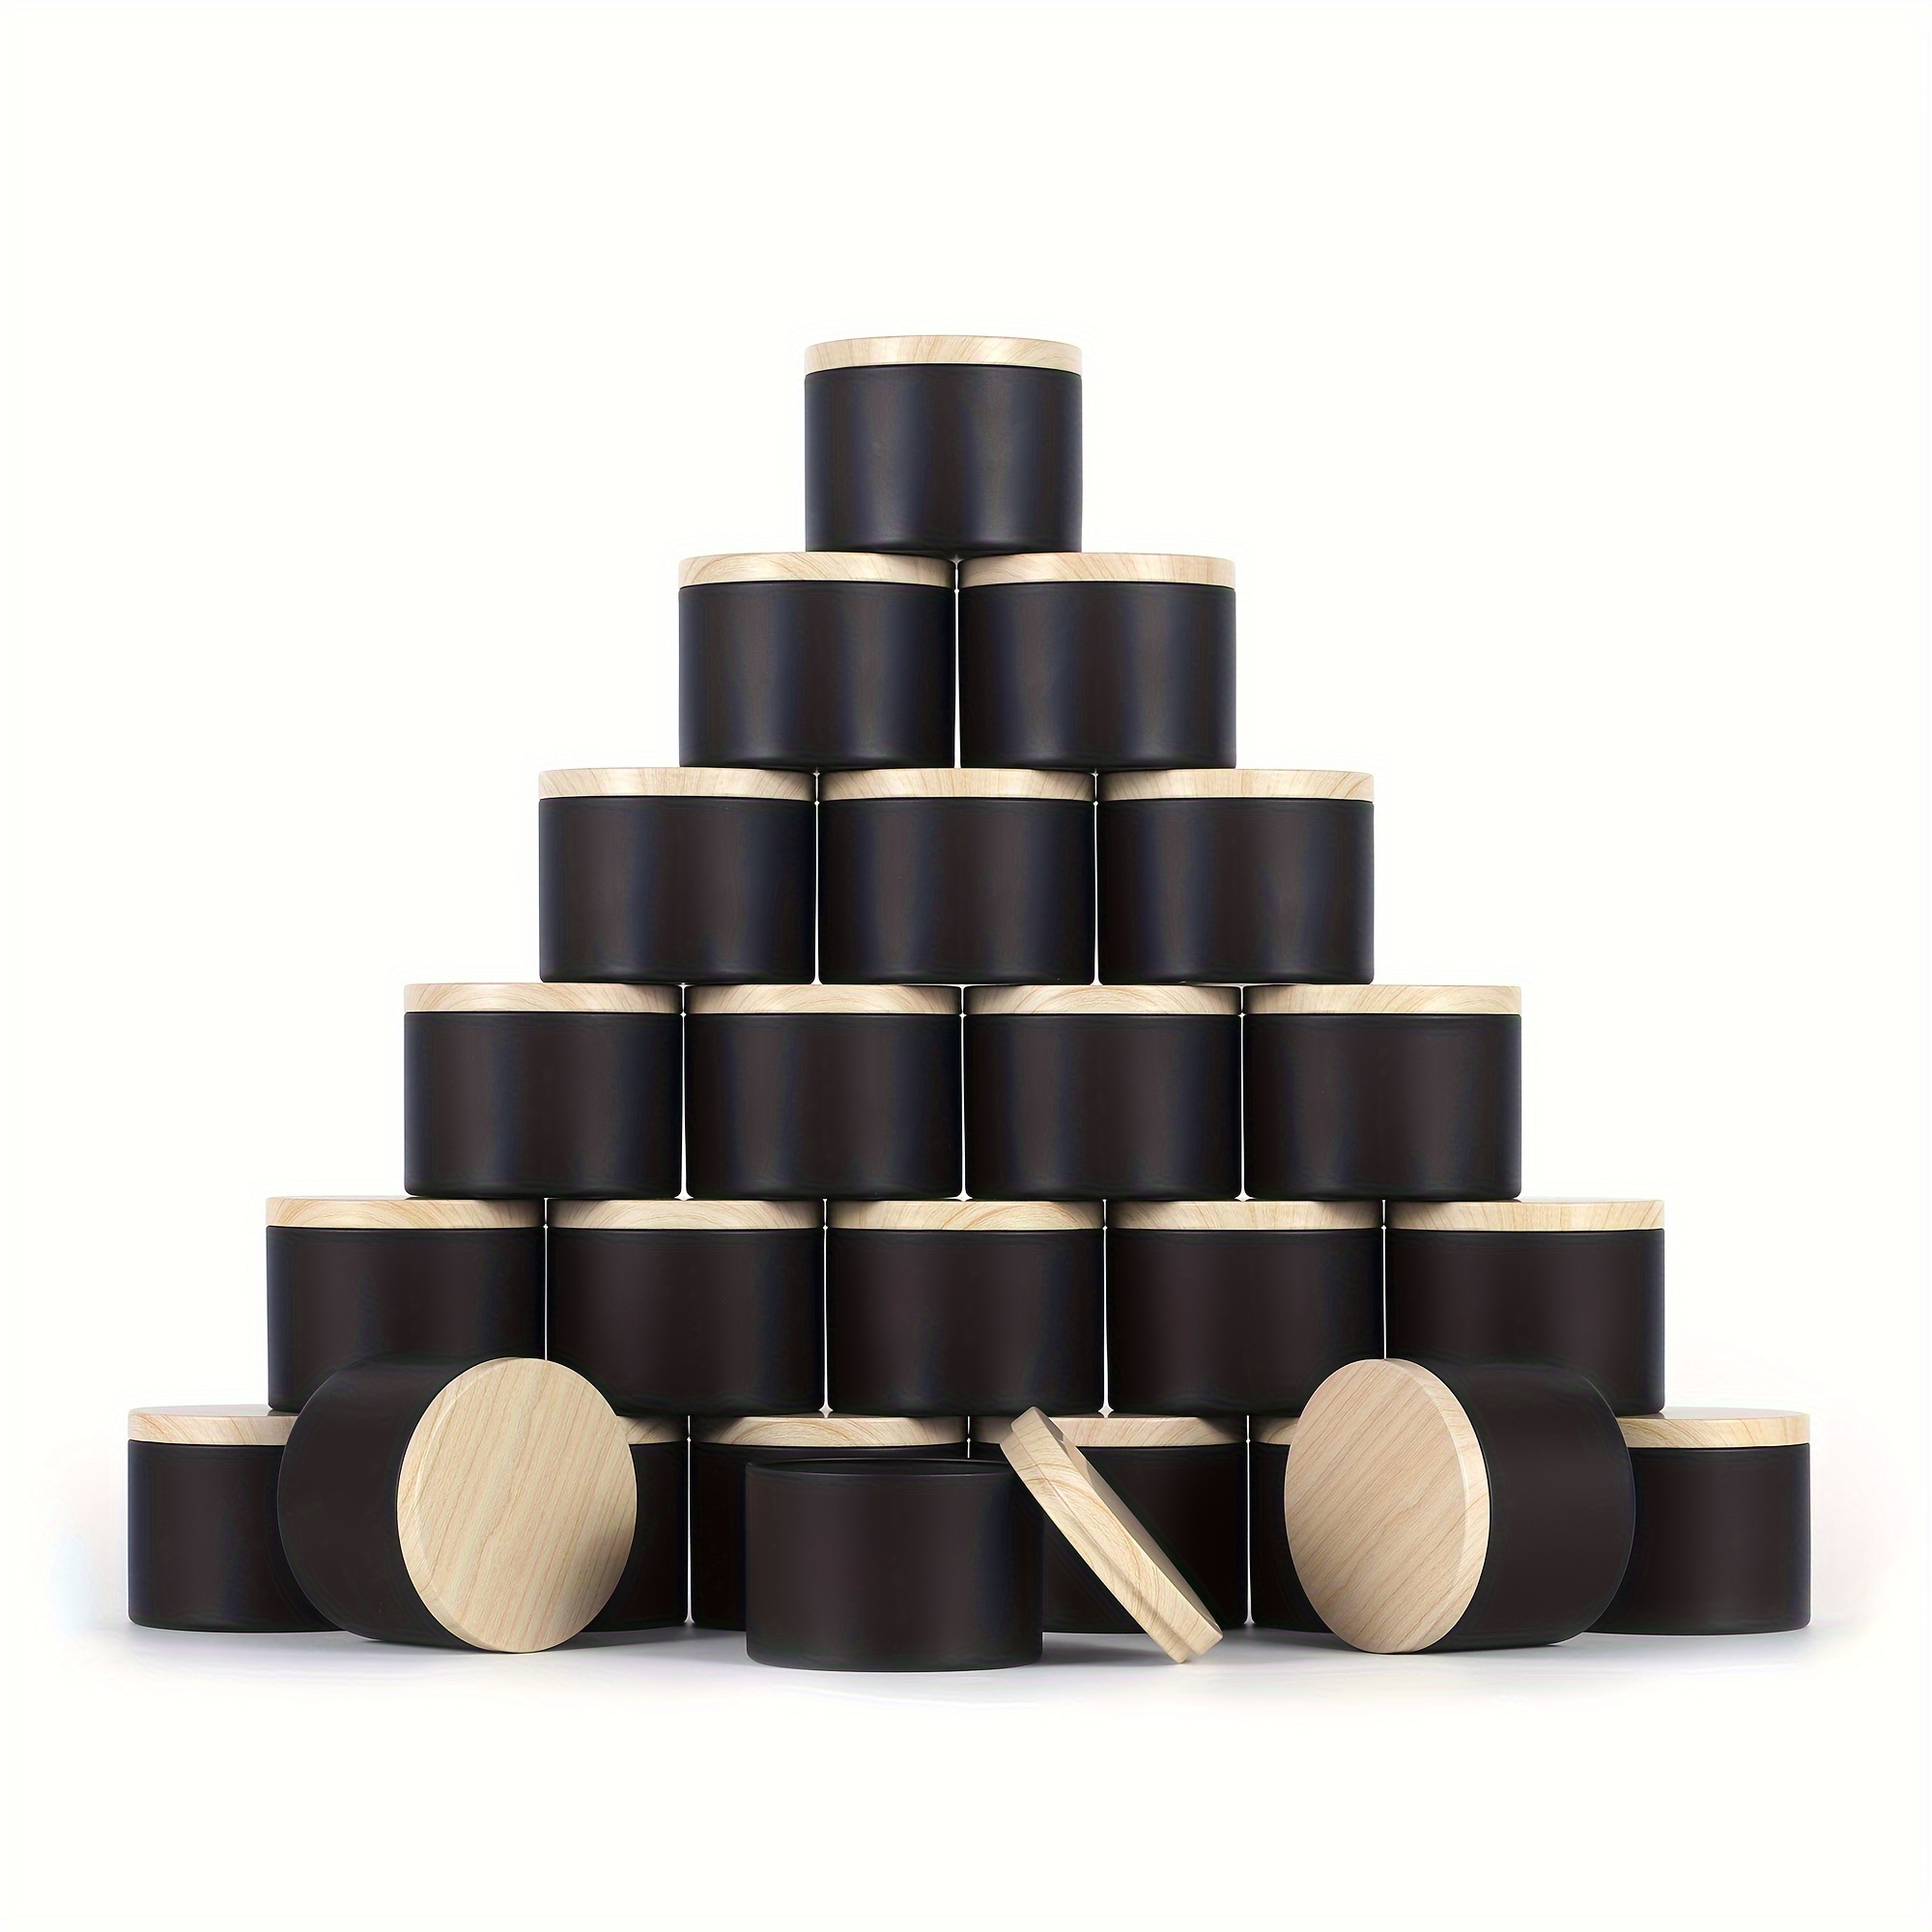 Black Tin Jars for Candle Making, 8 oz Containers with Lids